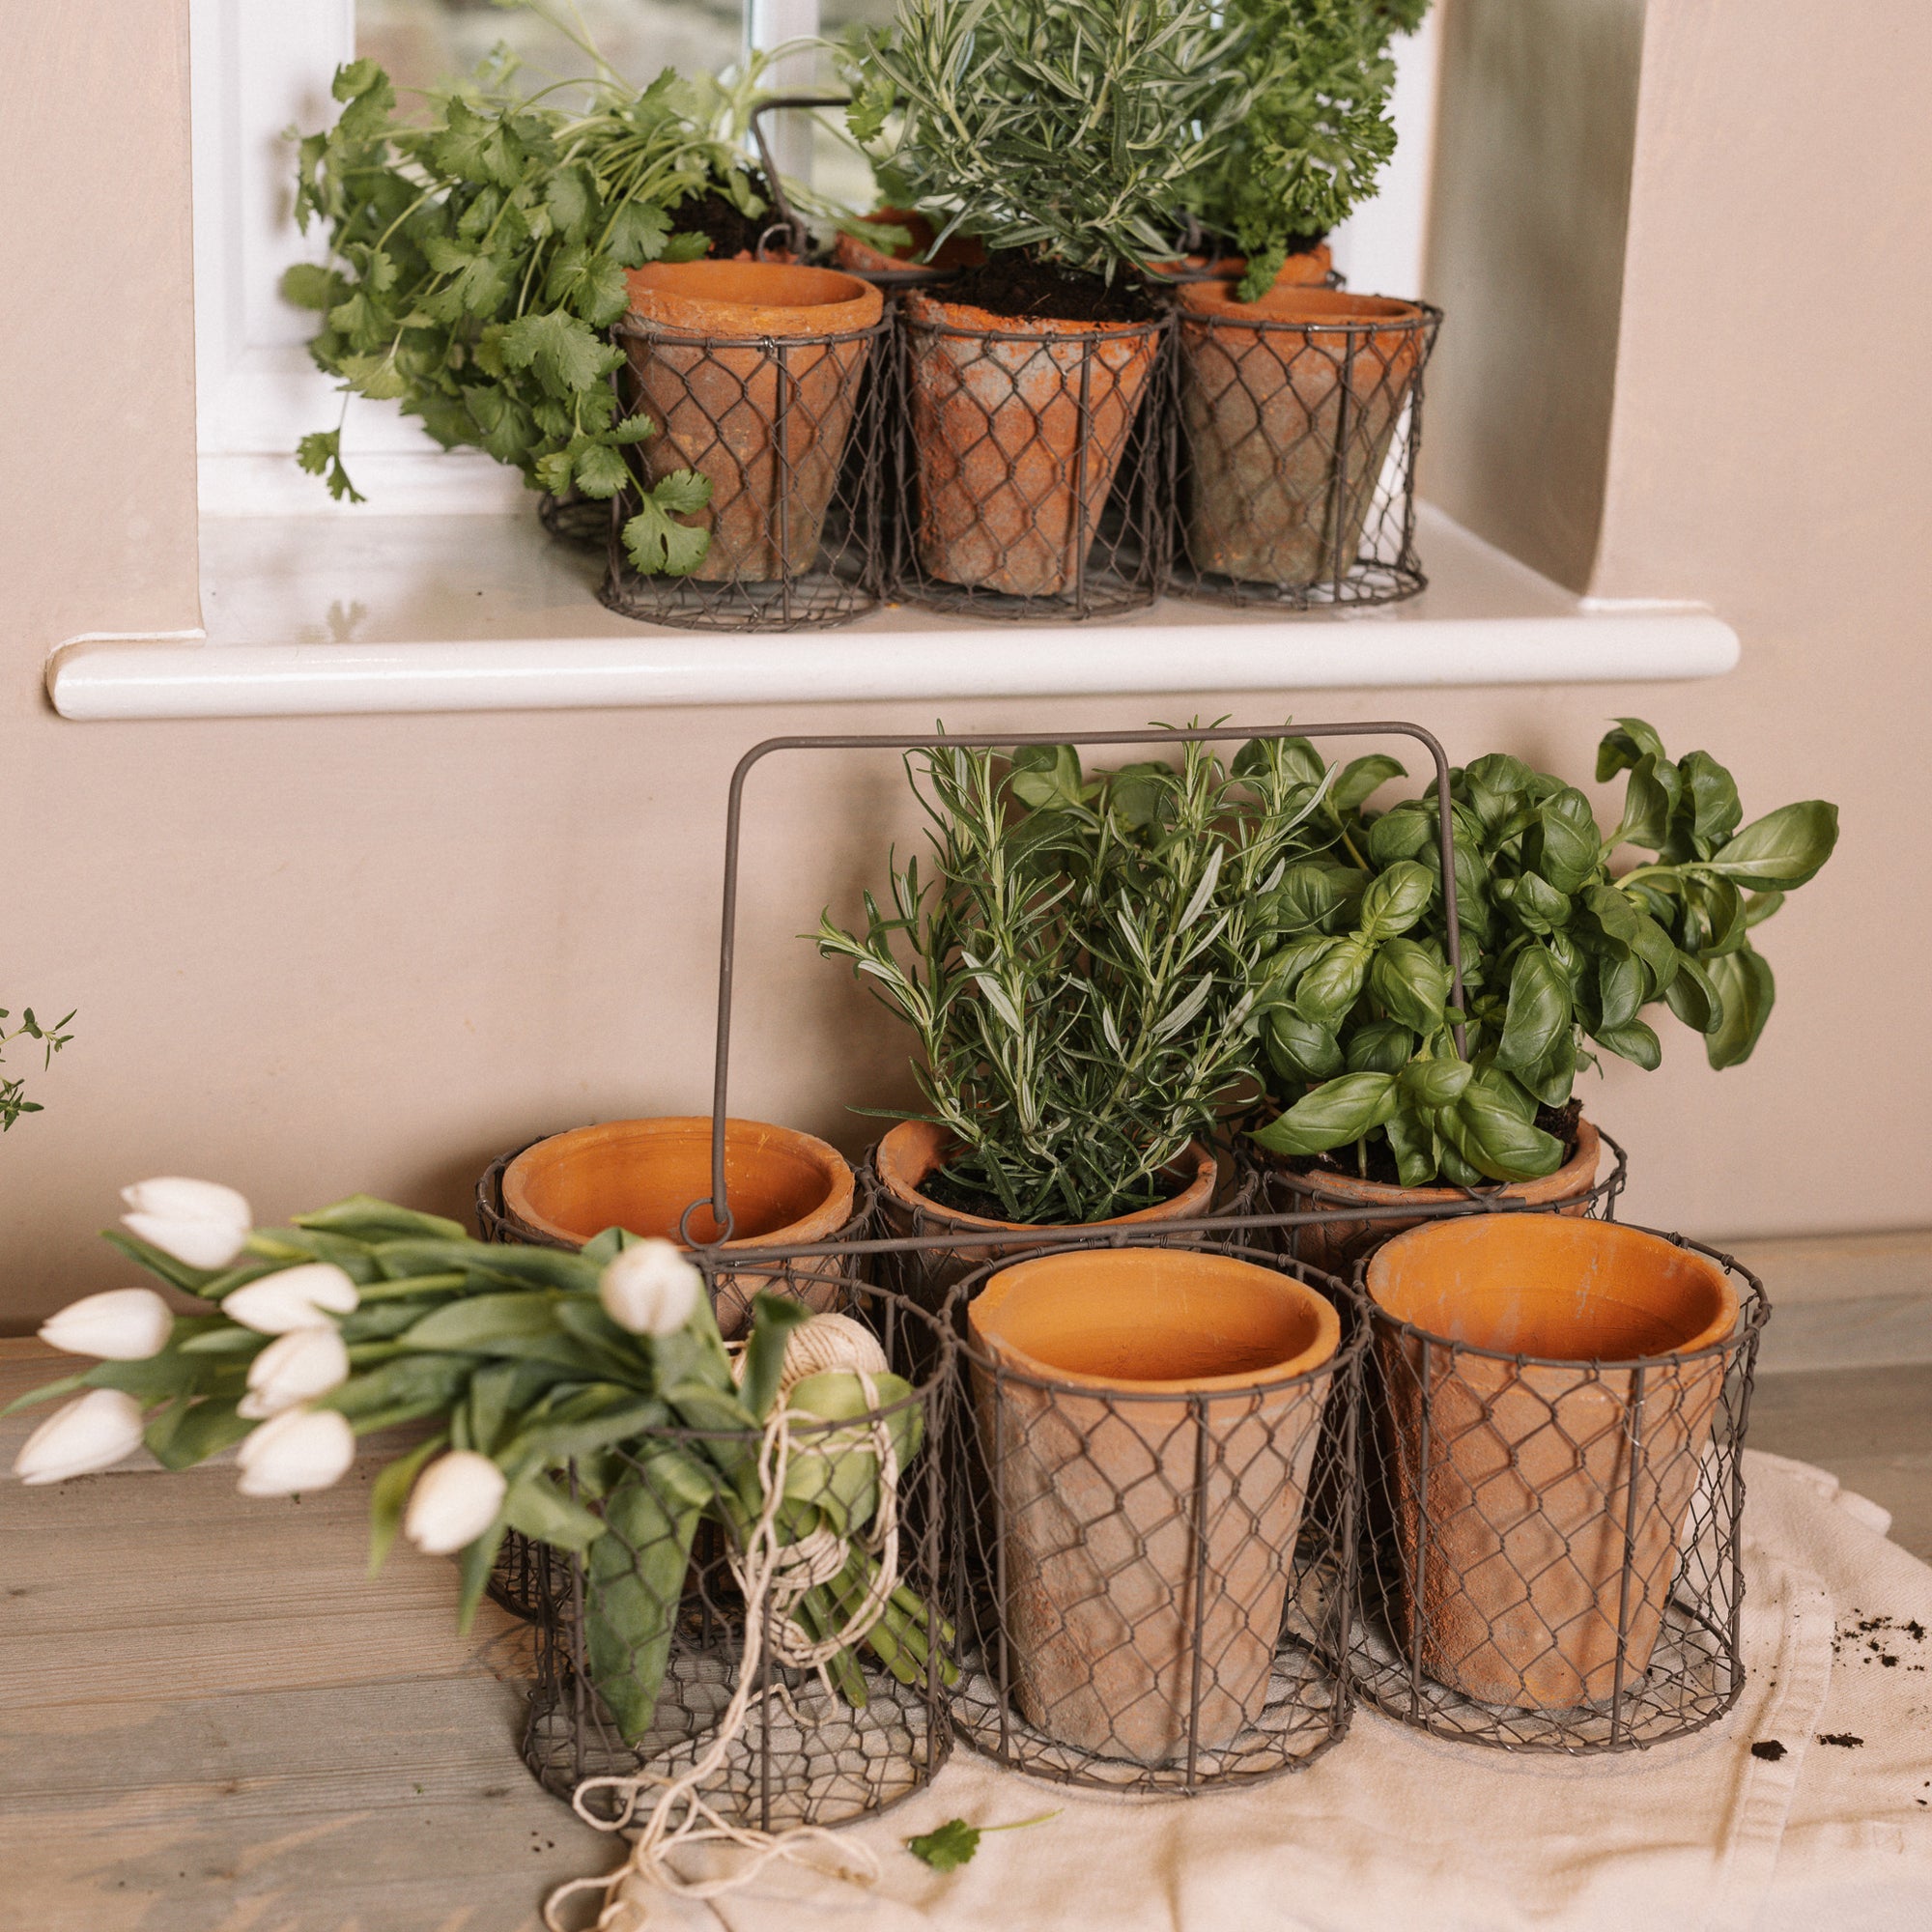 Clay herb pots in wire basket with plants and flowers.